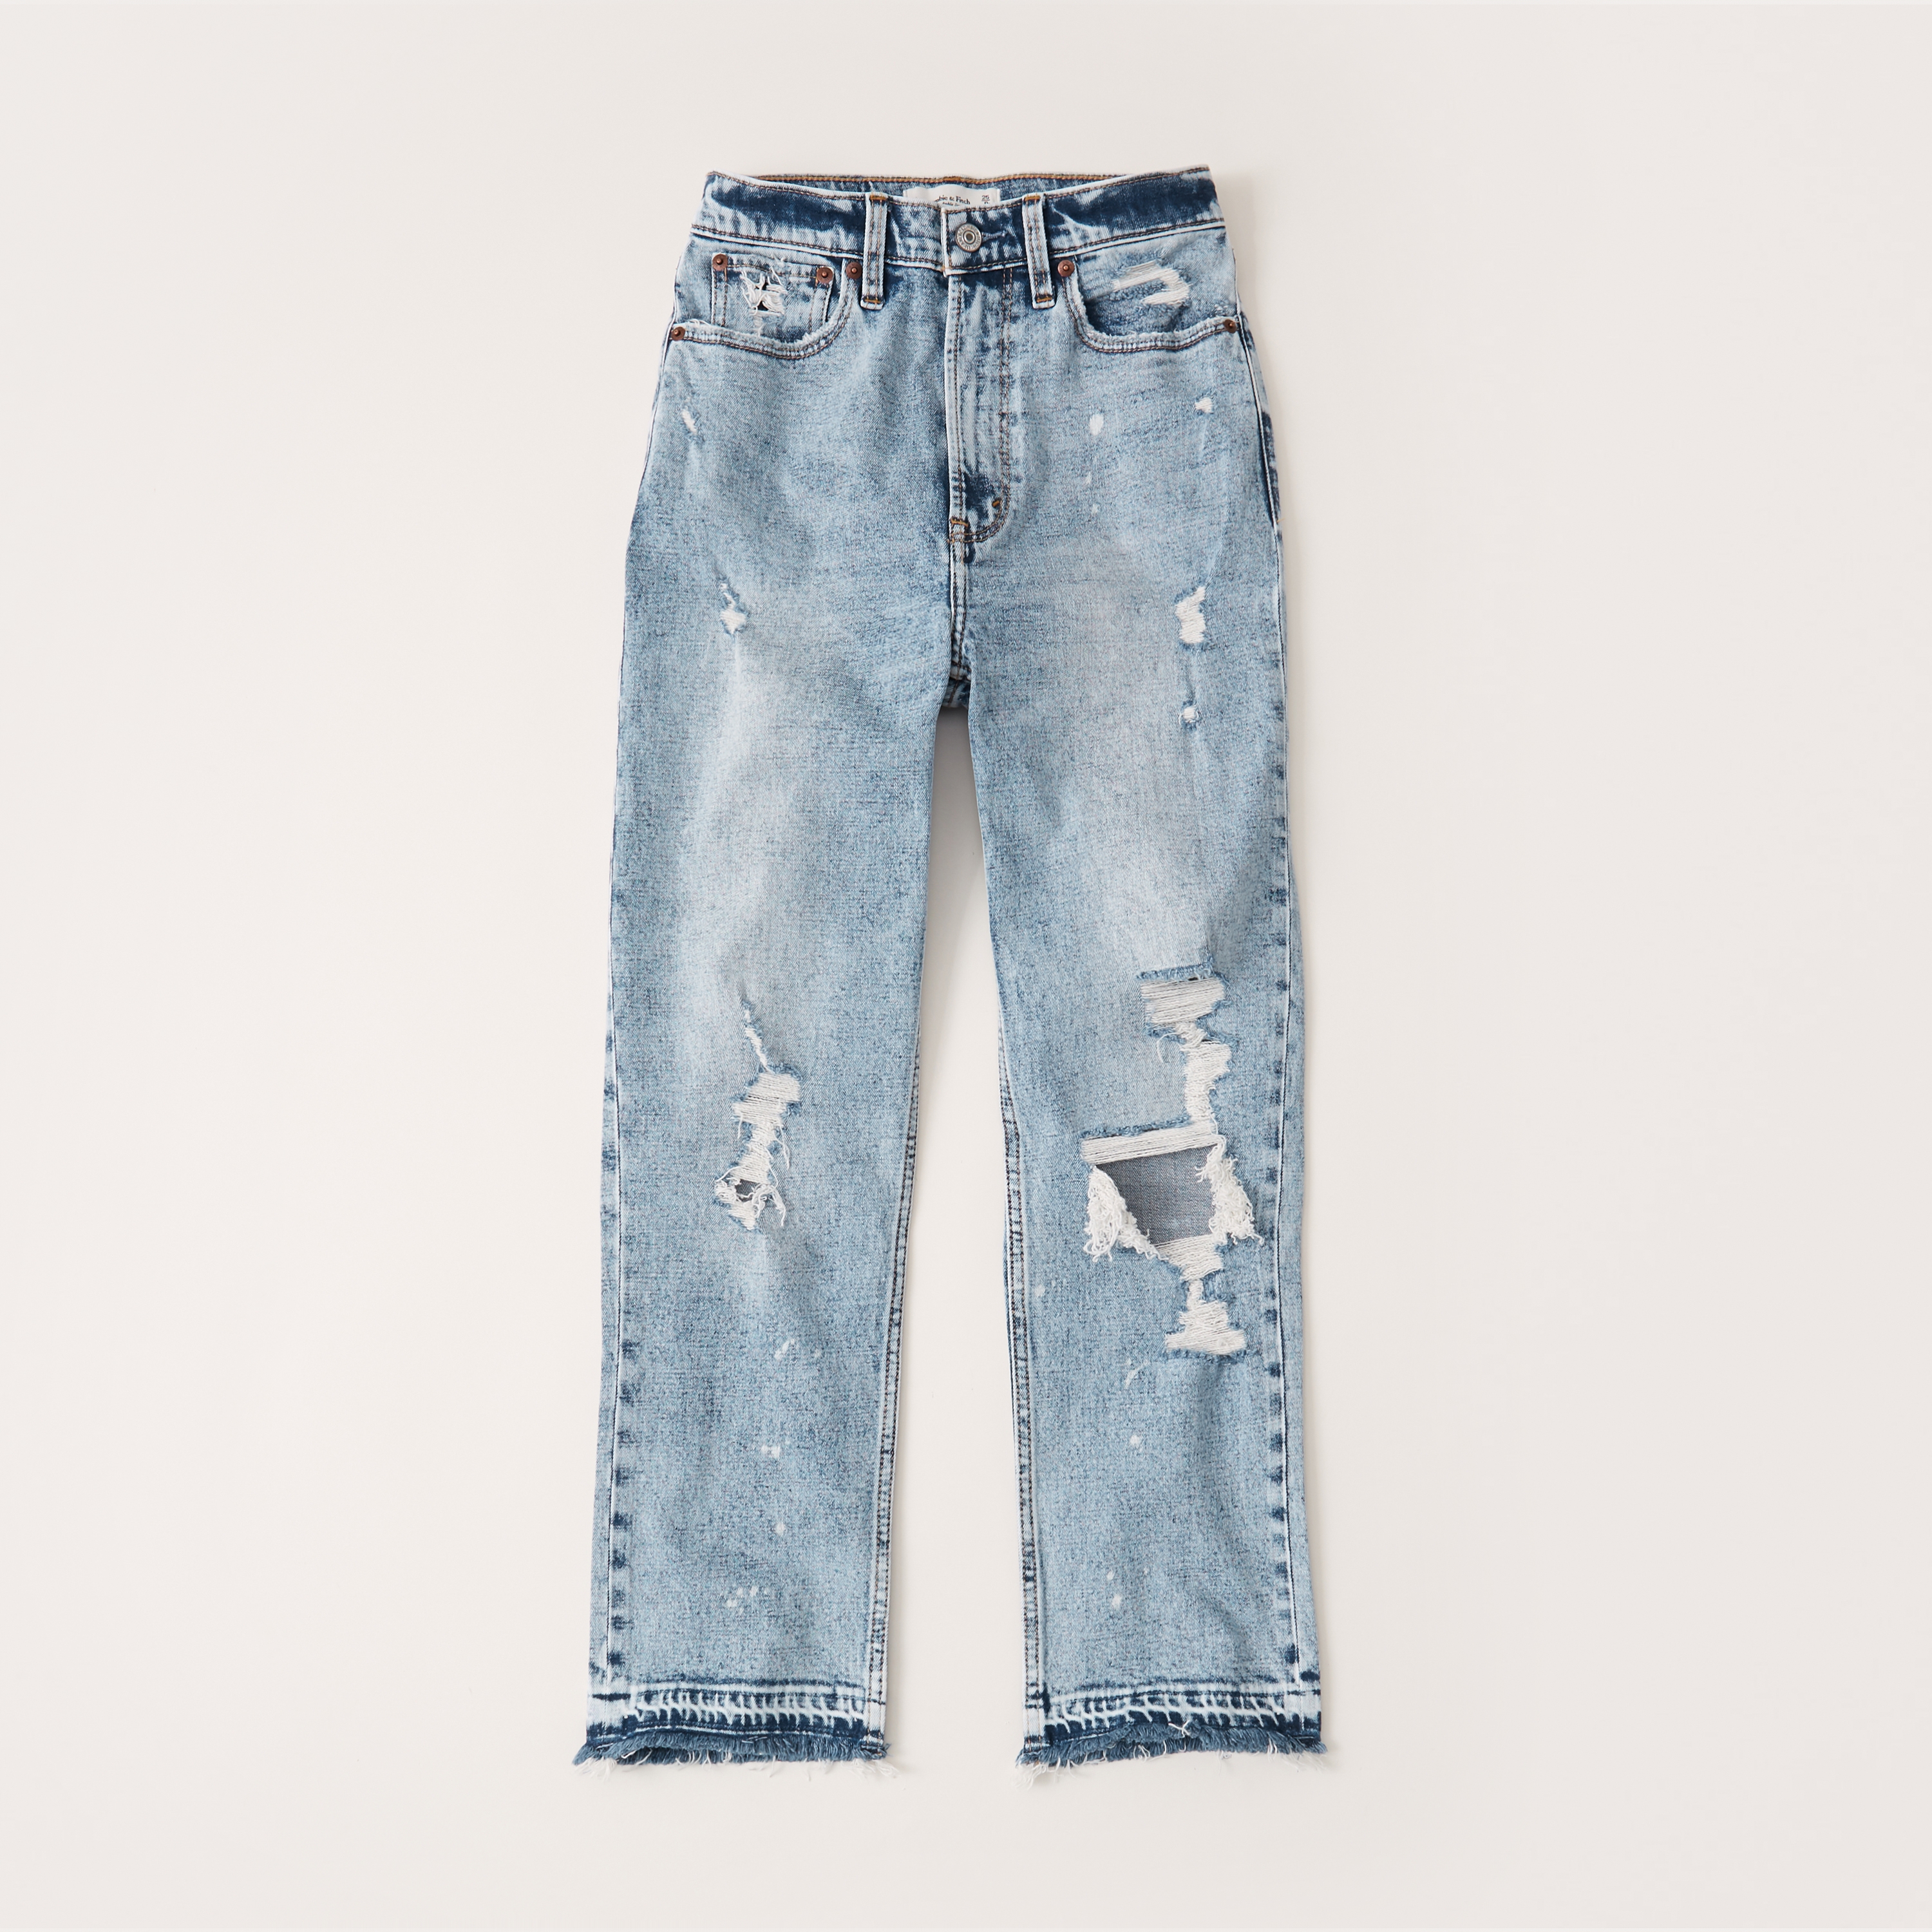 abercrombie fitch ankle length